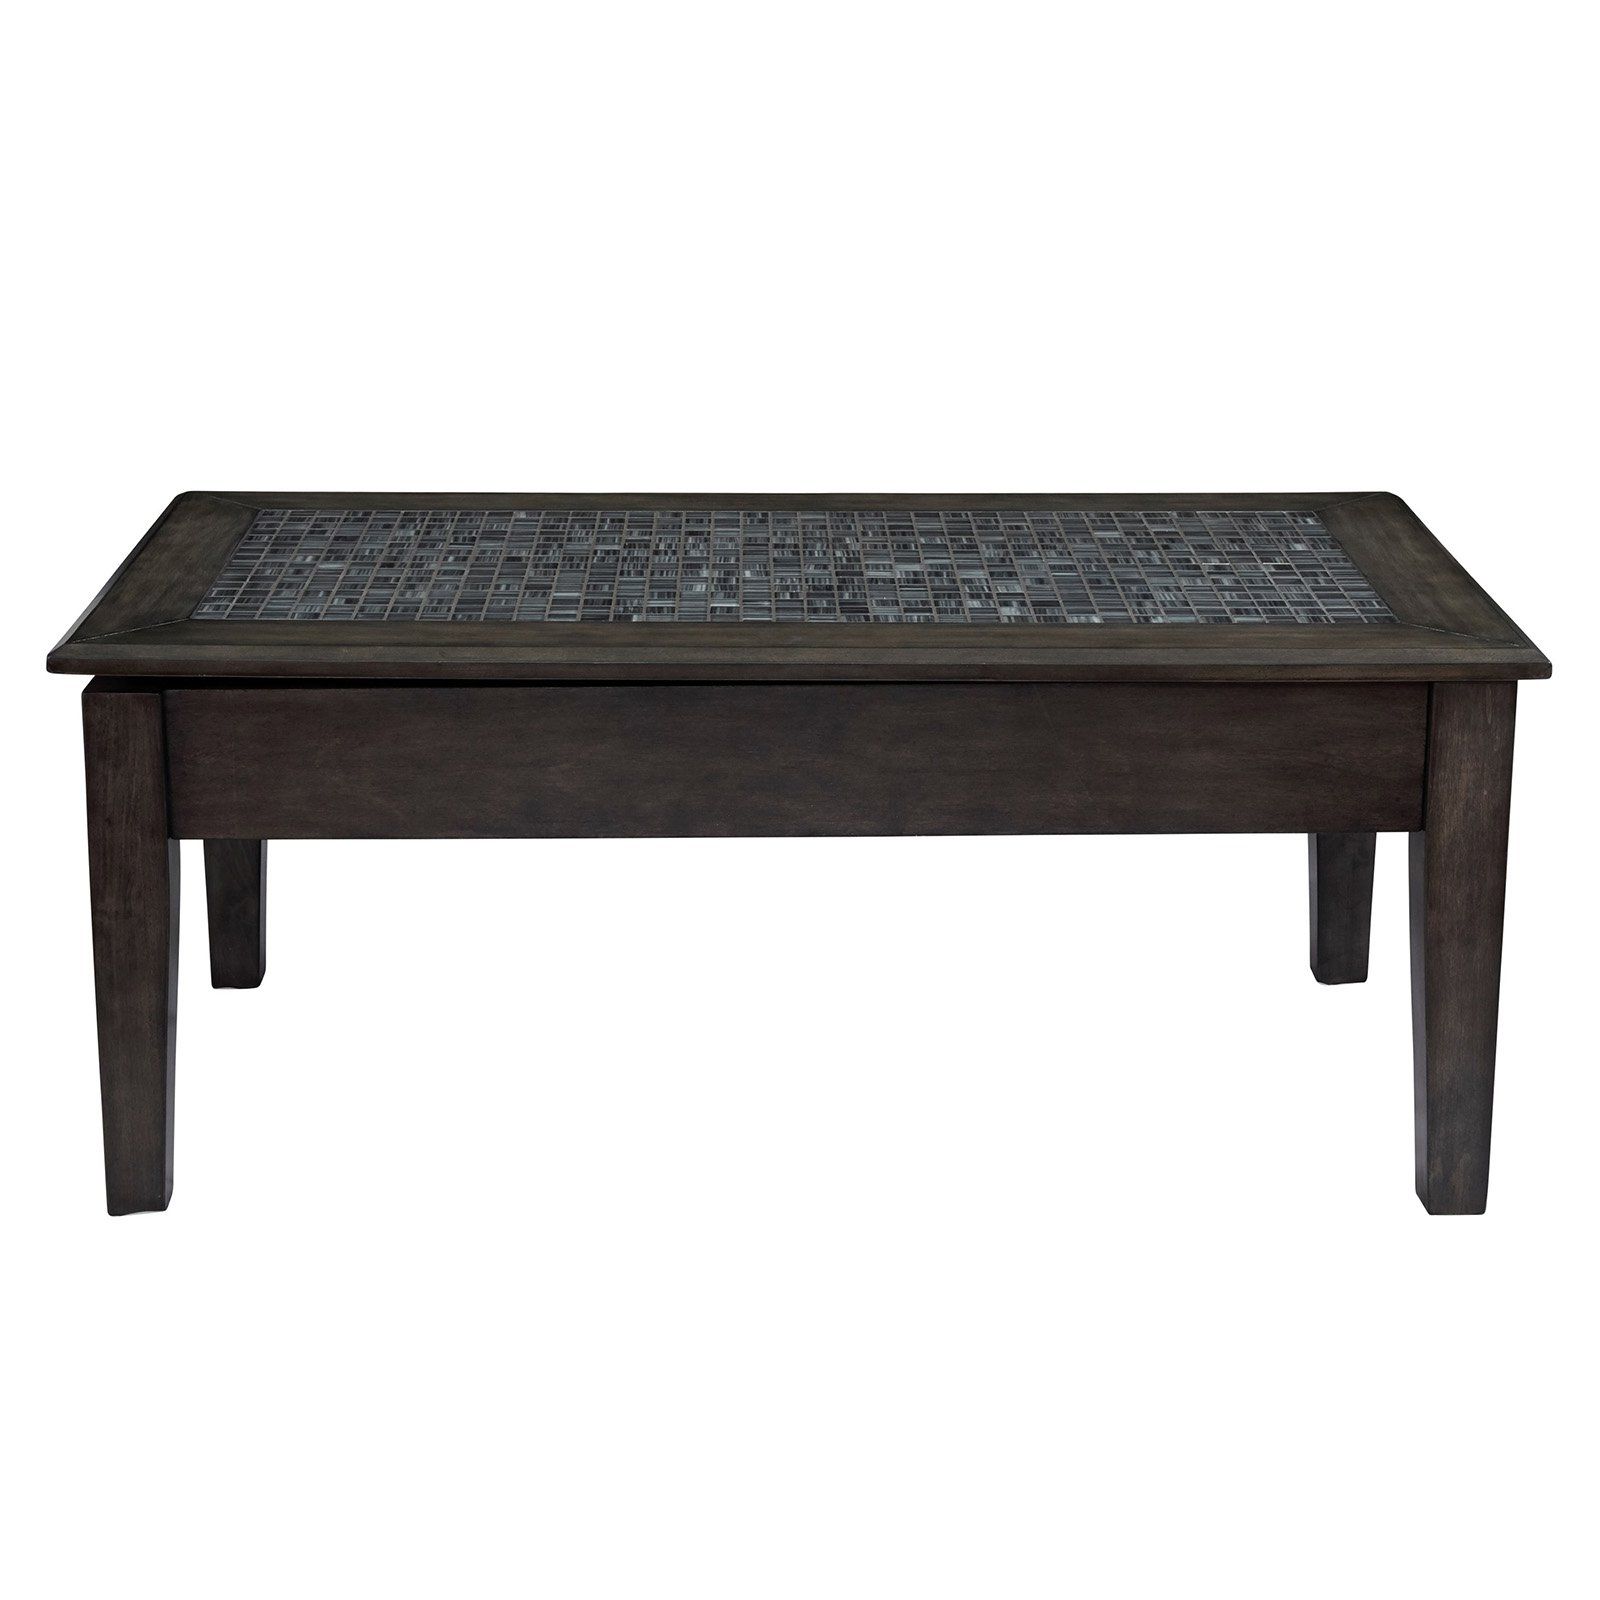 Gray Wood Veneer Cocktail Tables Intended For Trendy Grey Mosaic Lift Top Cocktail Table Quantity:1 – Walmart (View 10 of 20)